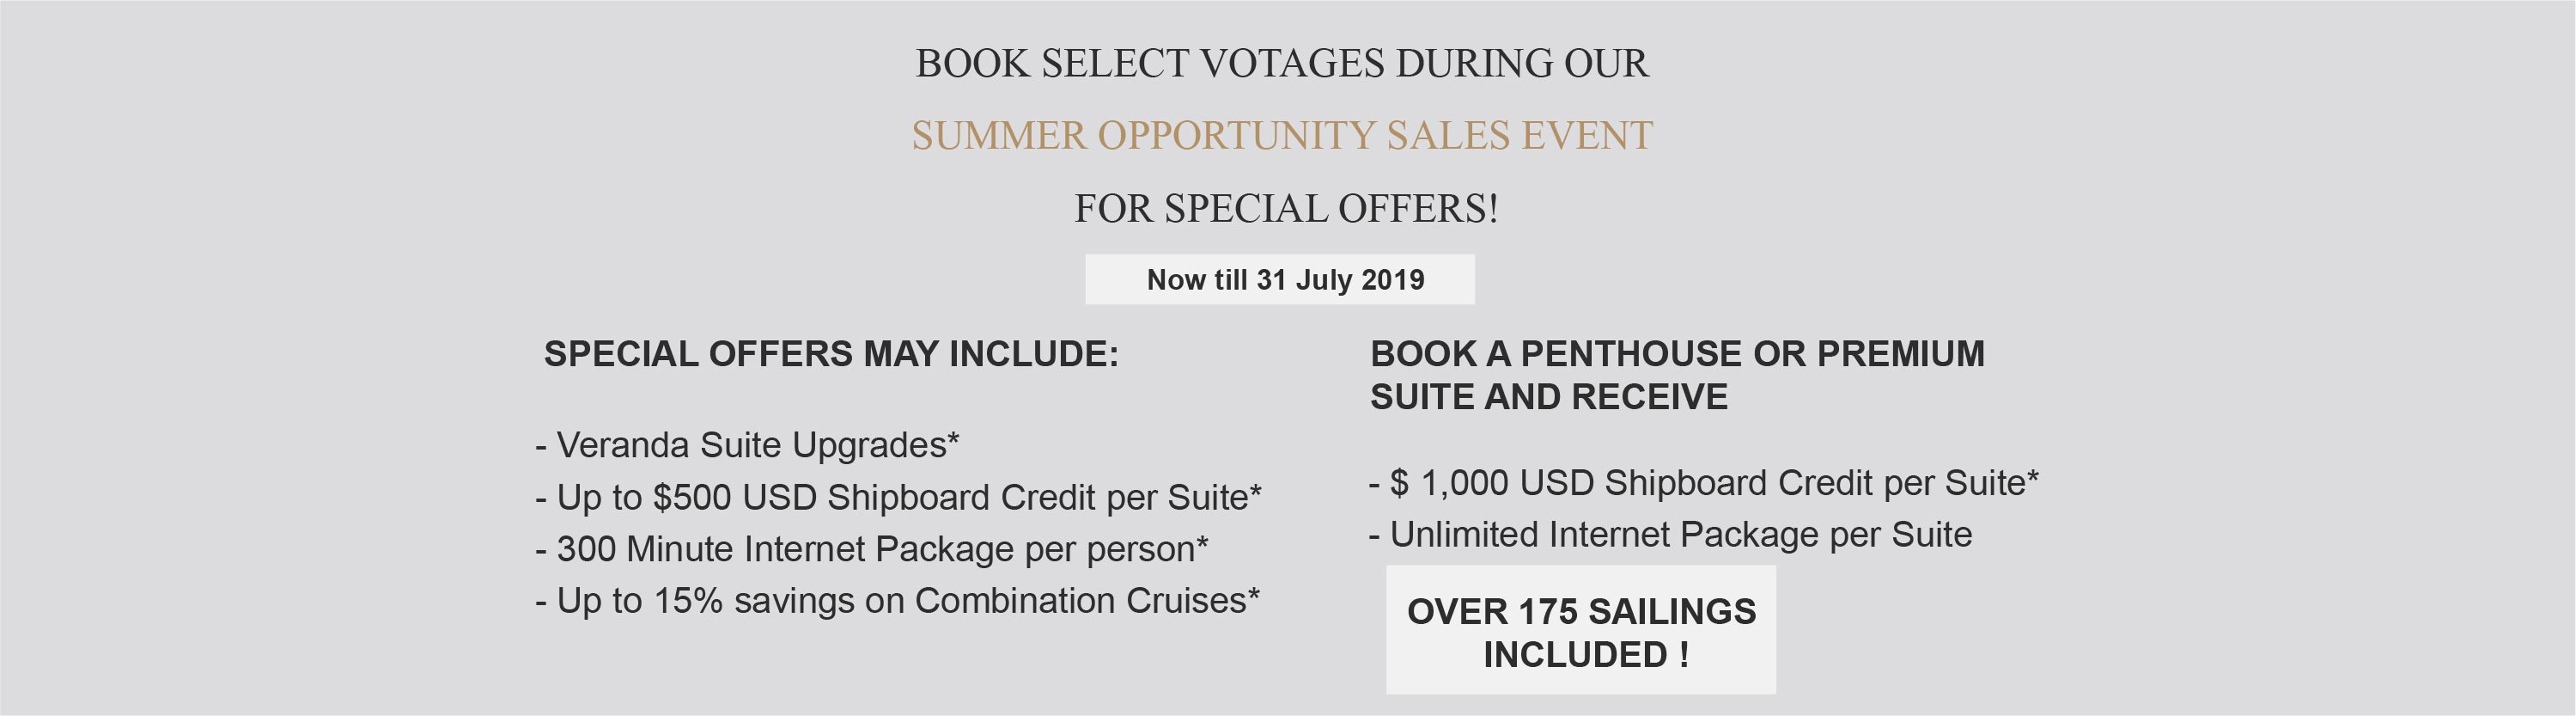 Seabourn Summer Opportunity Sales Event Seabourn Info  02